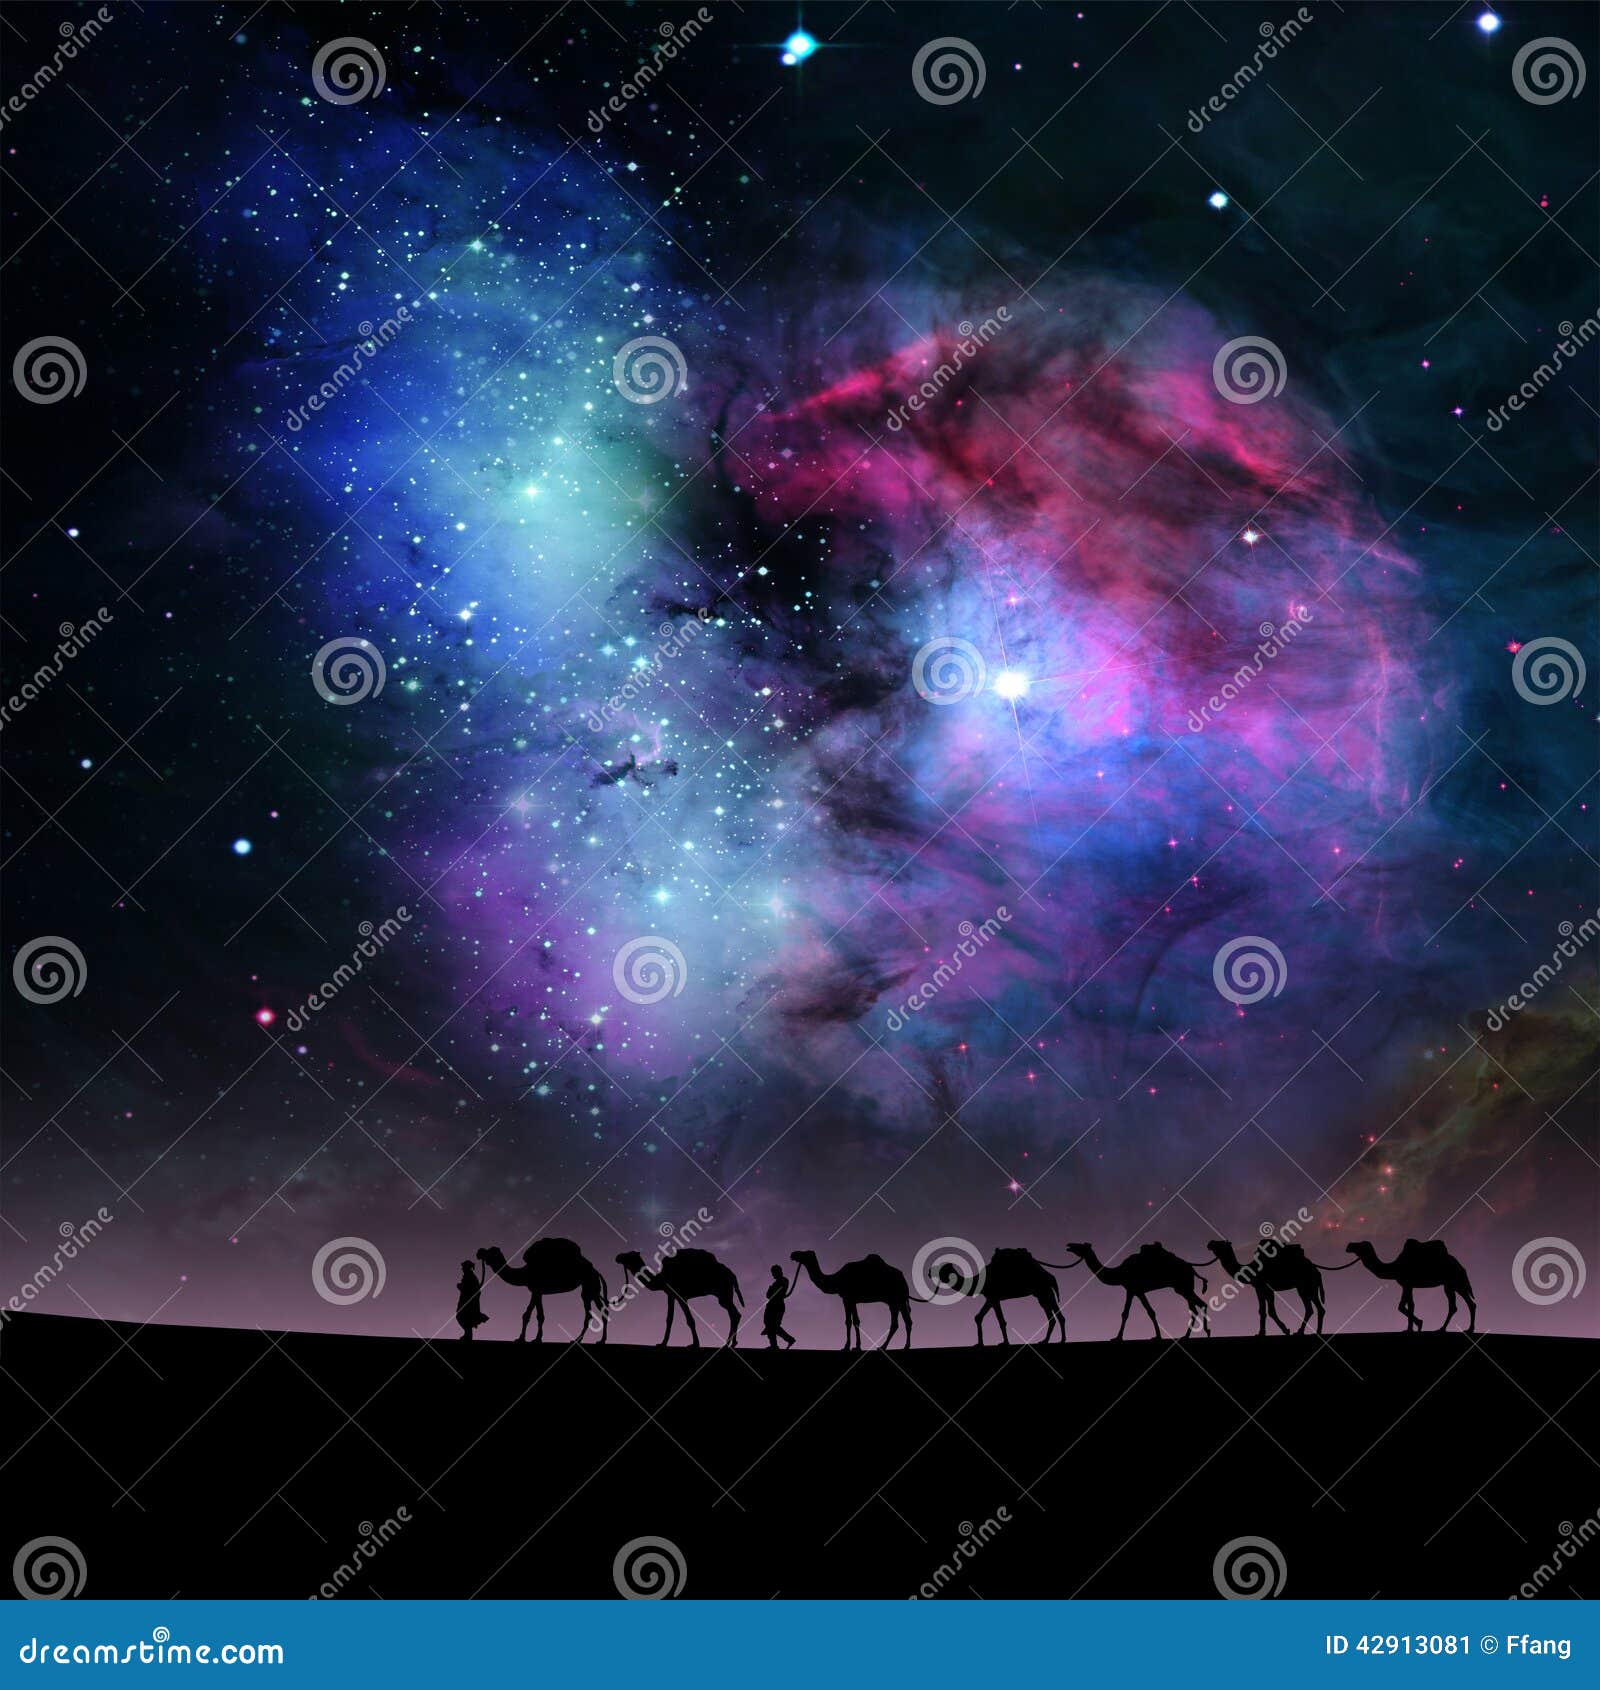 camels in night.